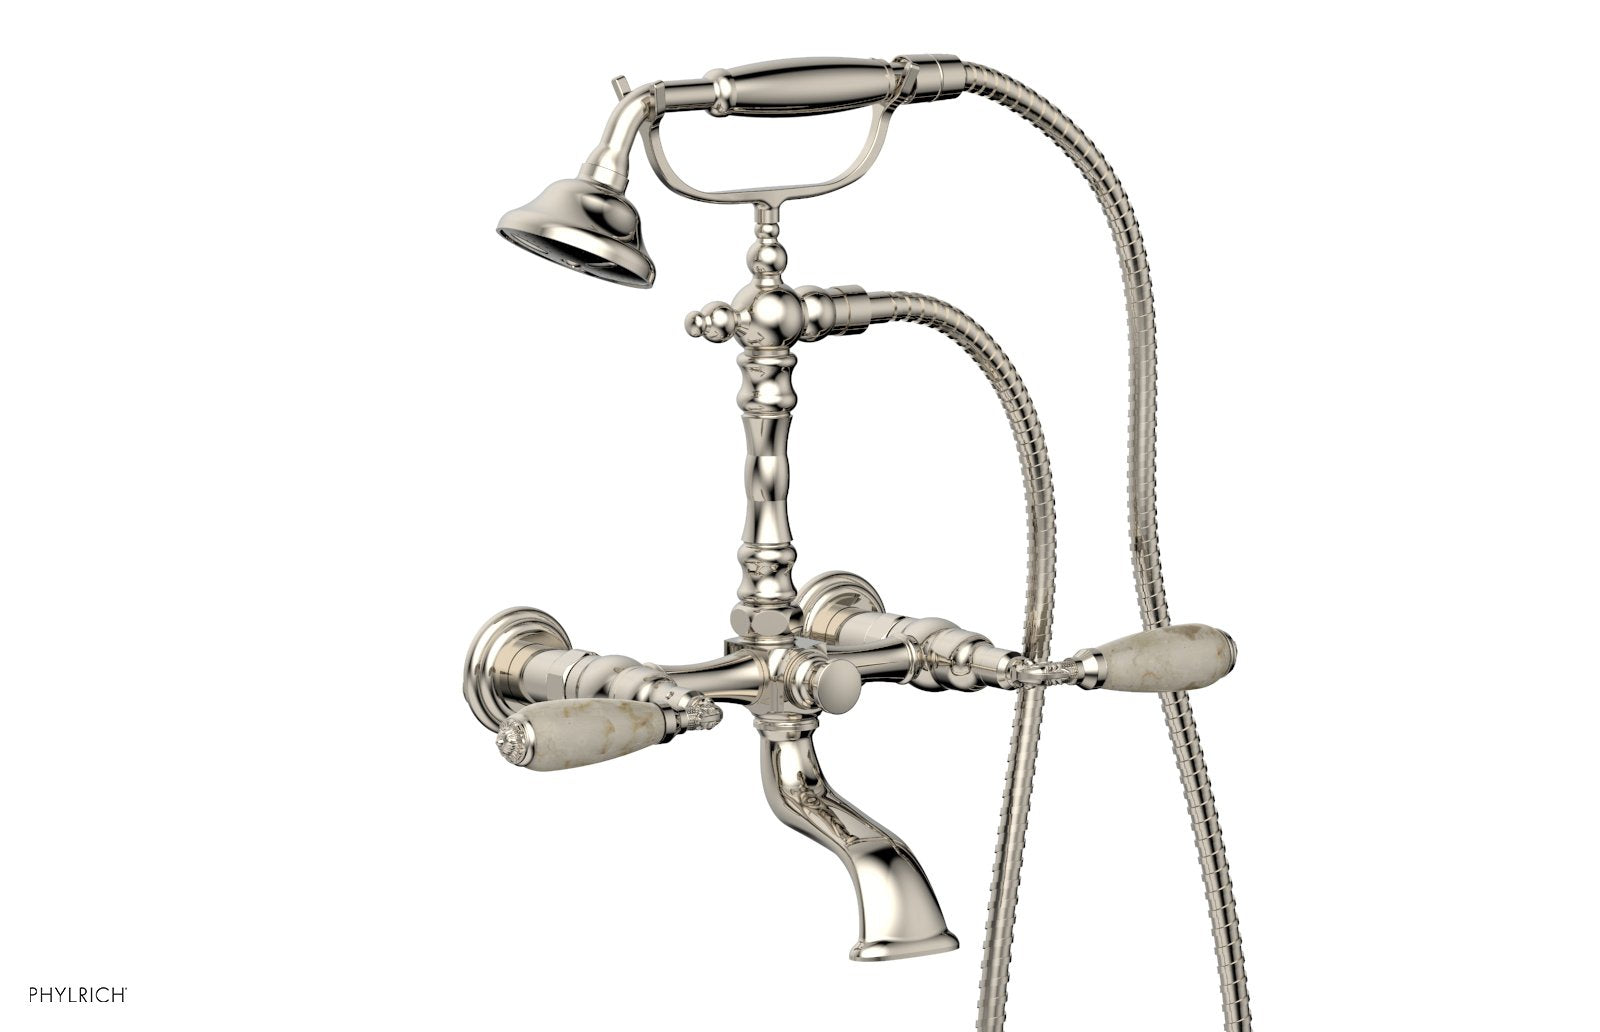 Phylrich VALENCIA Exposed Tub & Hand Shower - Beige Marble Lever Handle